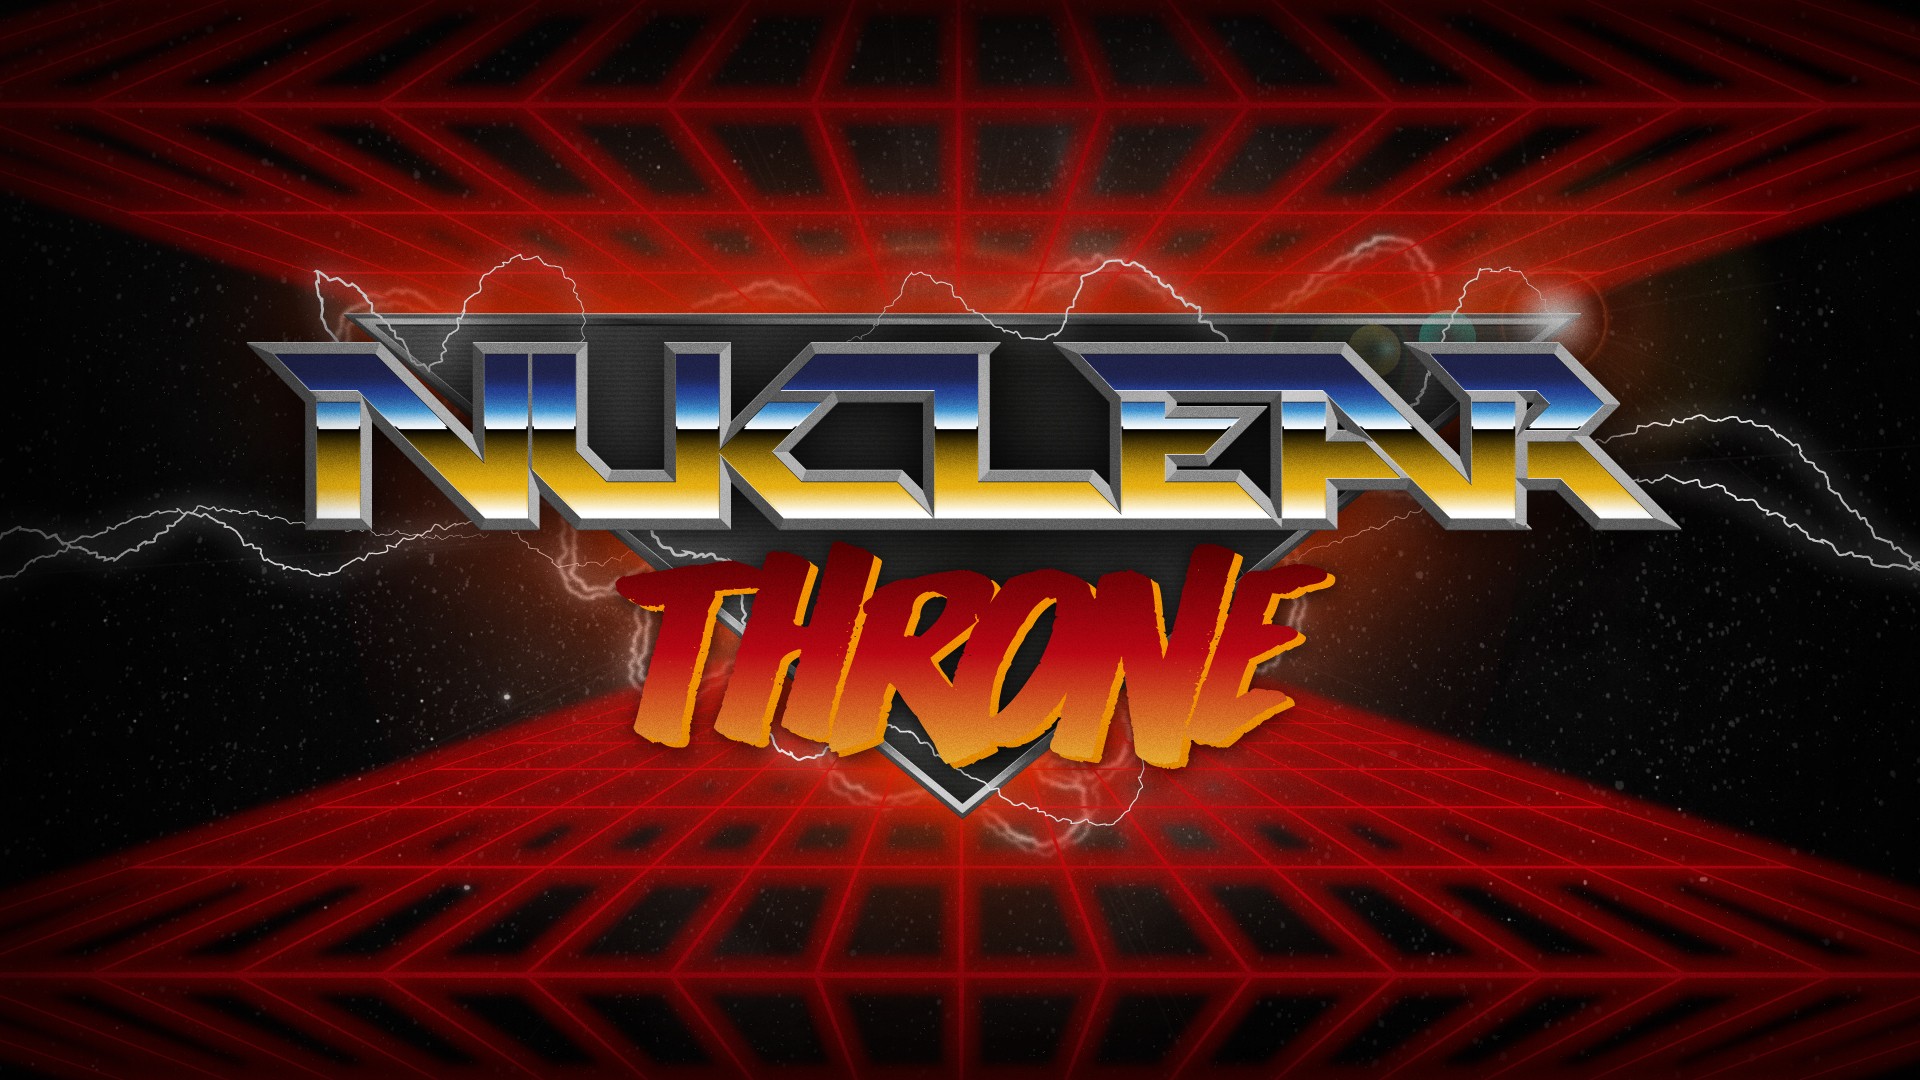 video Games, Retrofuturism, Grid, 1980s, Space, Typography, Nuclear Throne Wallpaper